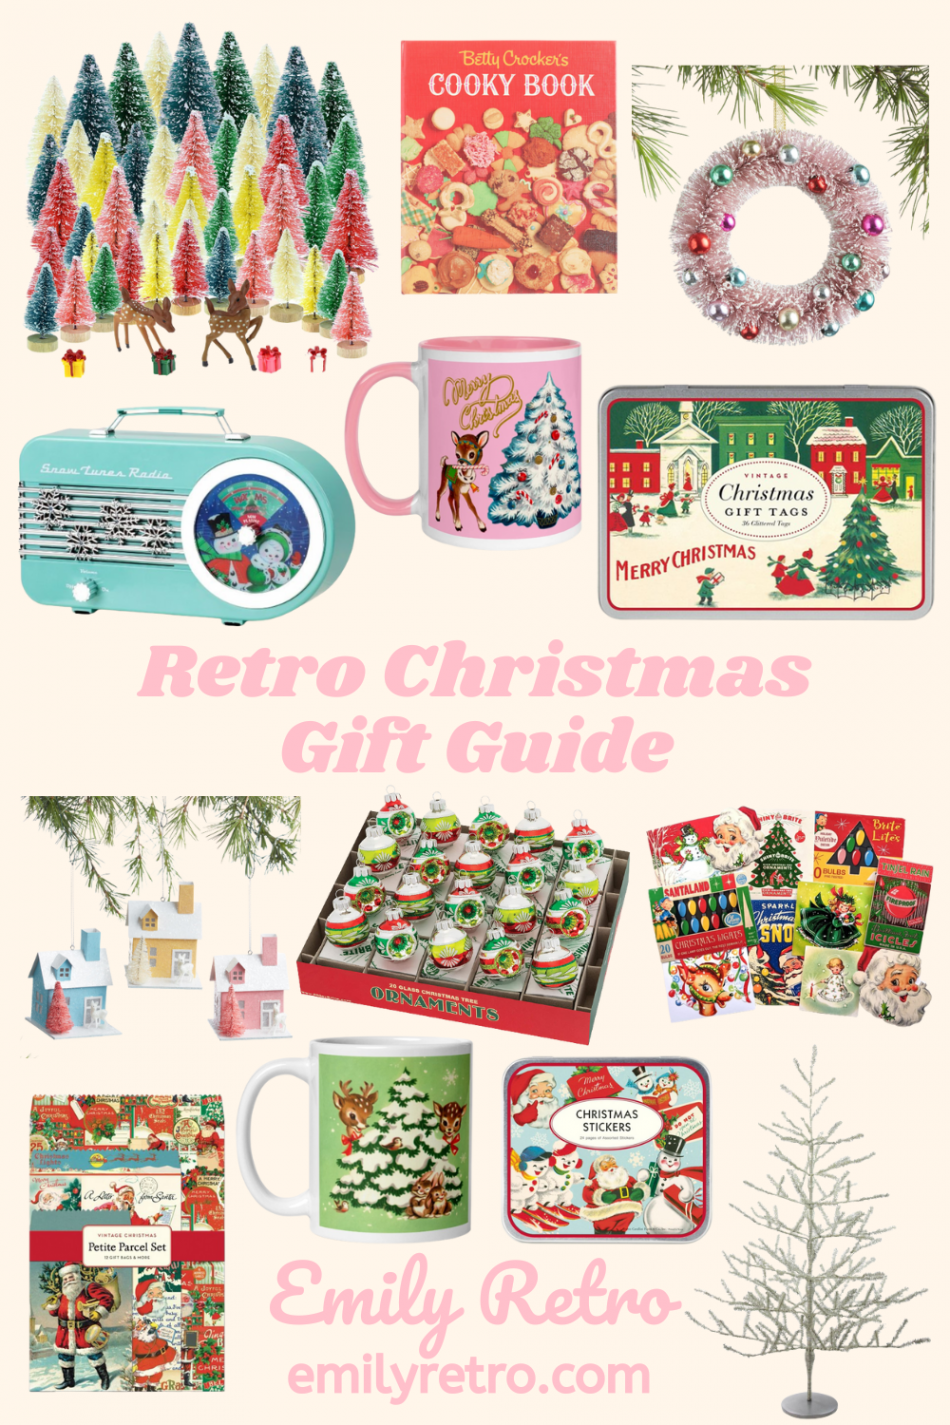 Gift Guide Ideas for Vintage Christmas Lovers - Good Retro Holiday